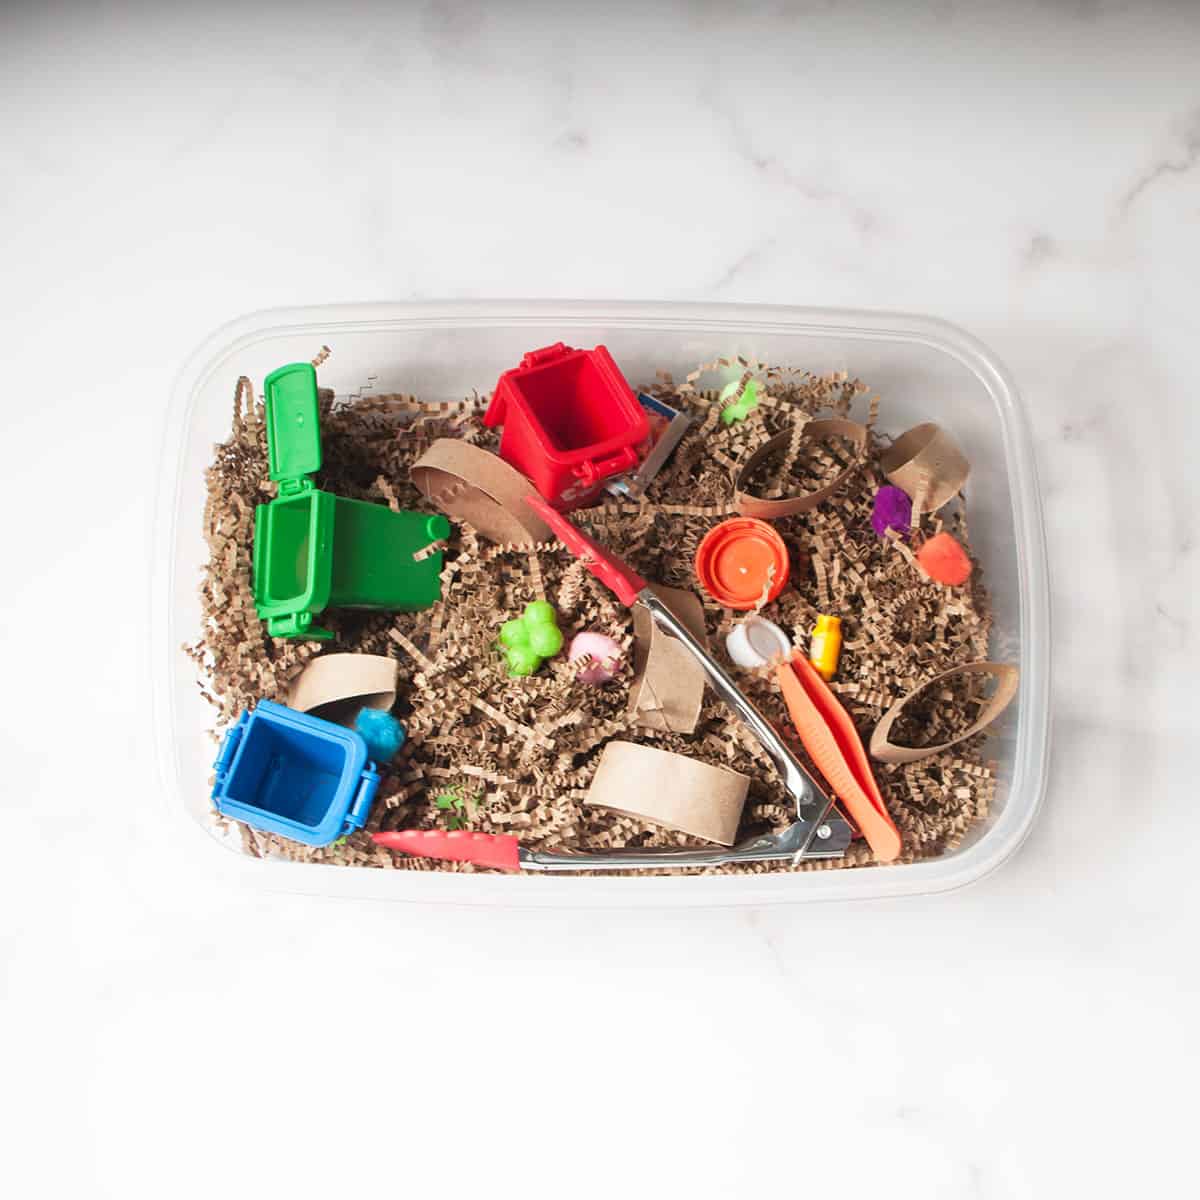 A sensory bin with a recycling theme. It is made from brown crinkle paper, scoops, toys, and recyled household items.